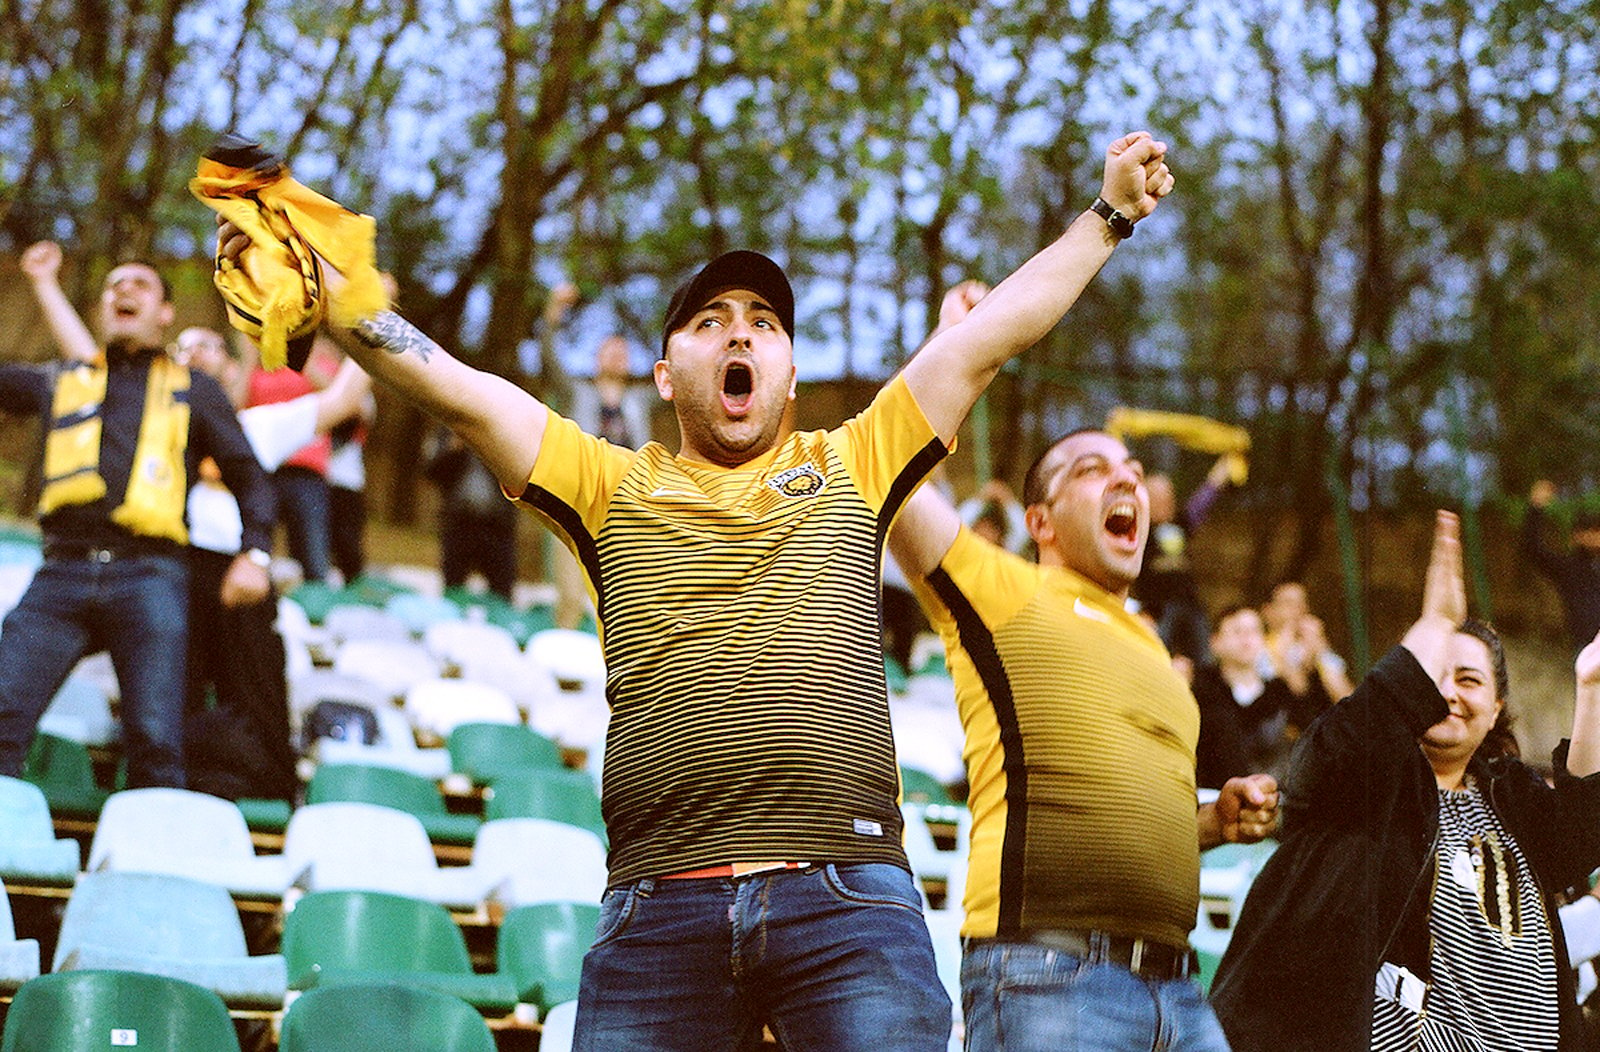 On the road with the football fans bridging Moldova’s divided nation